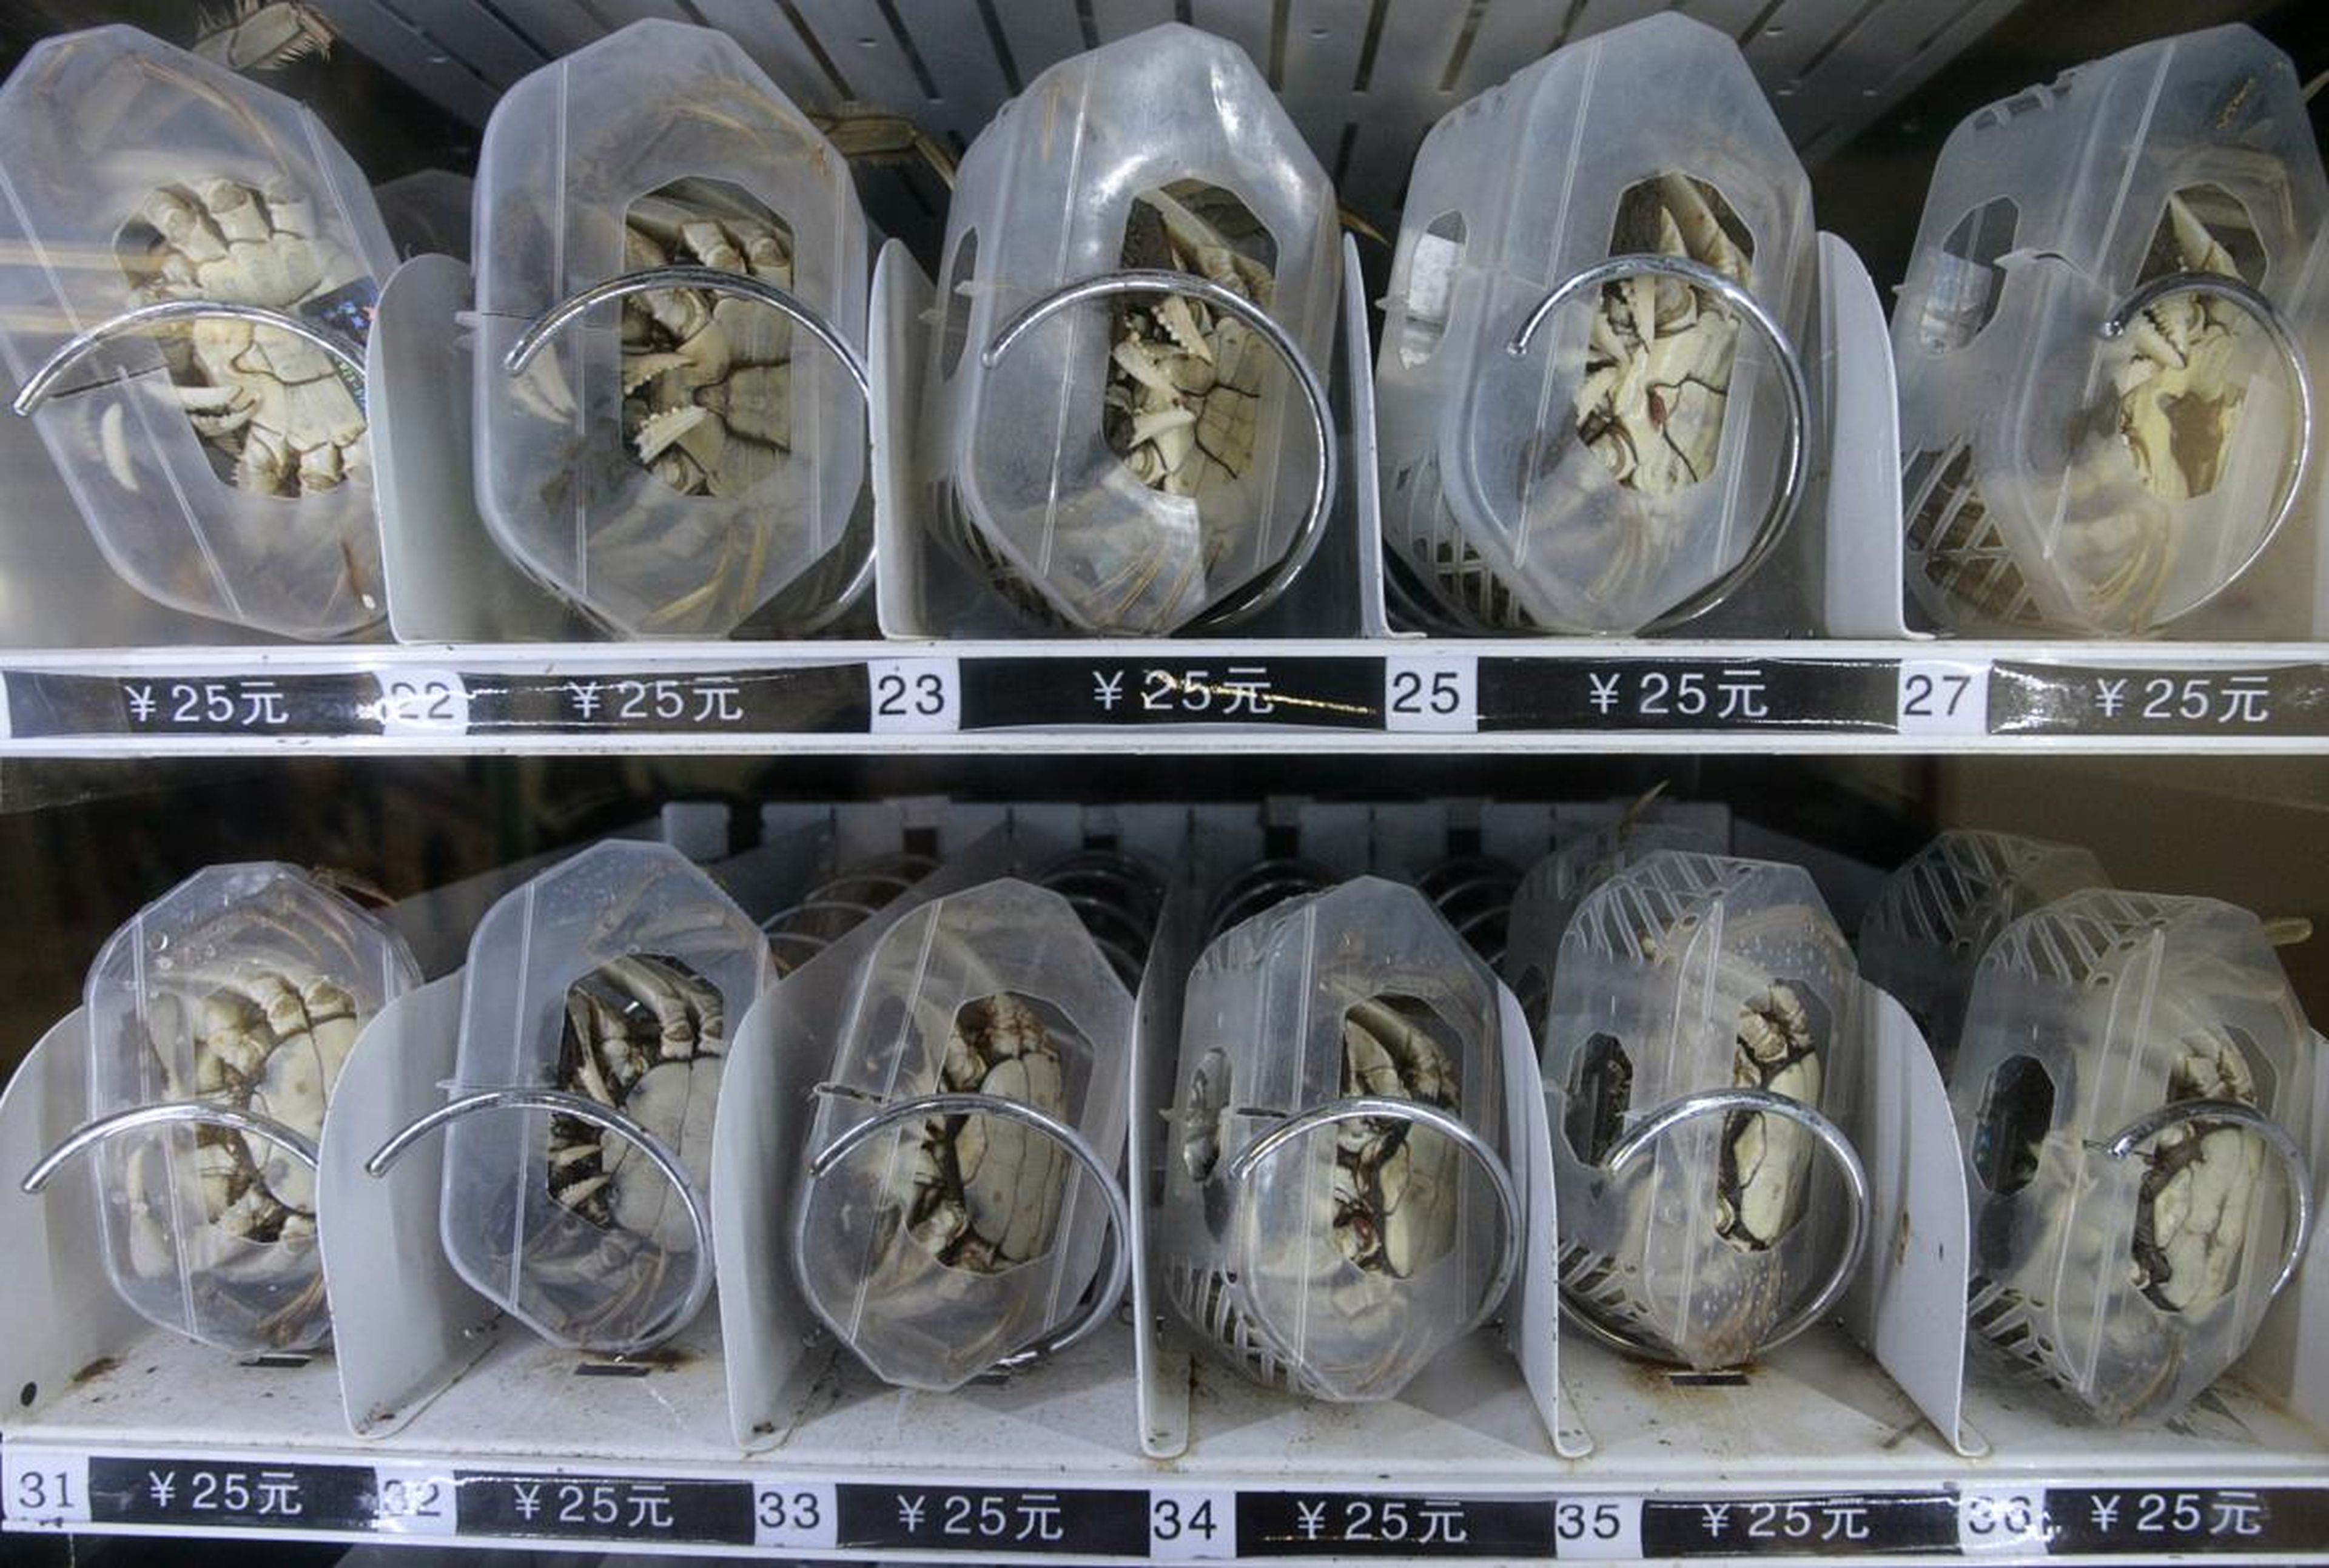 There's special packaging used to preserve the crabs.